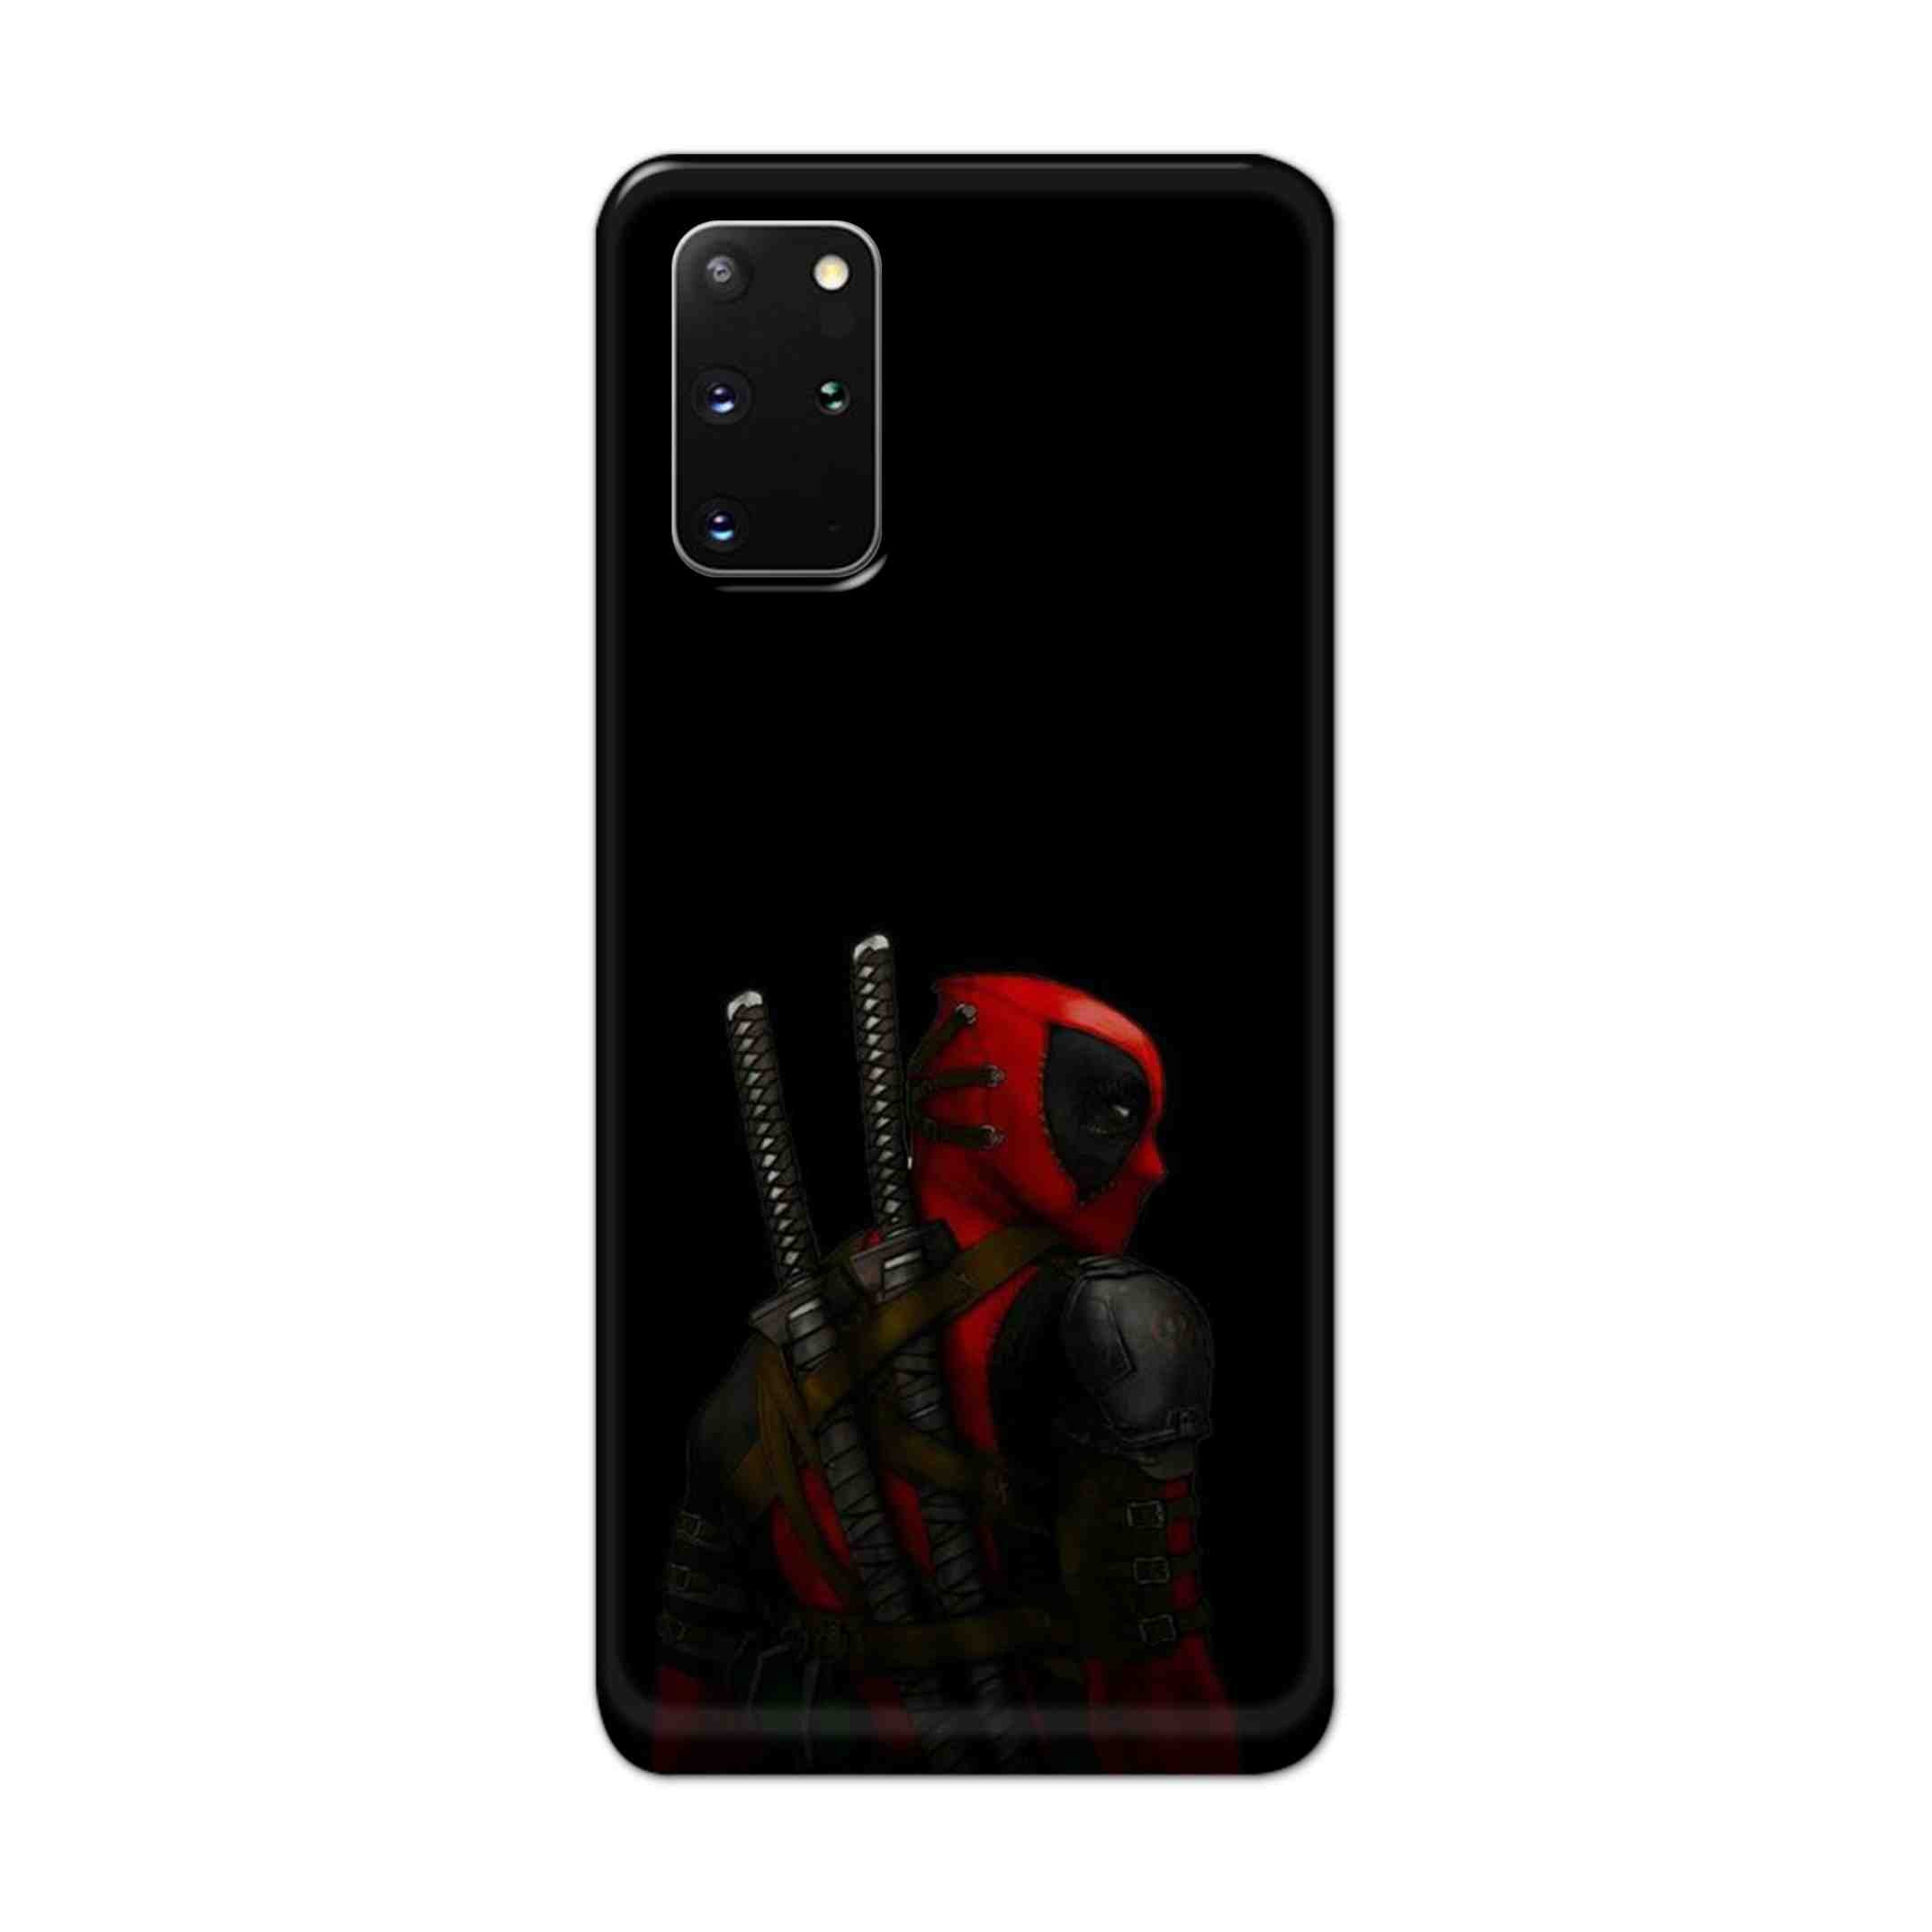 Buy Deadpool Hard Back Mobile Phone Case Cover For Samsung Galaxy S20 Plus Online